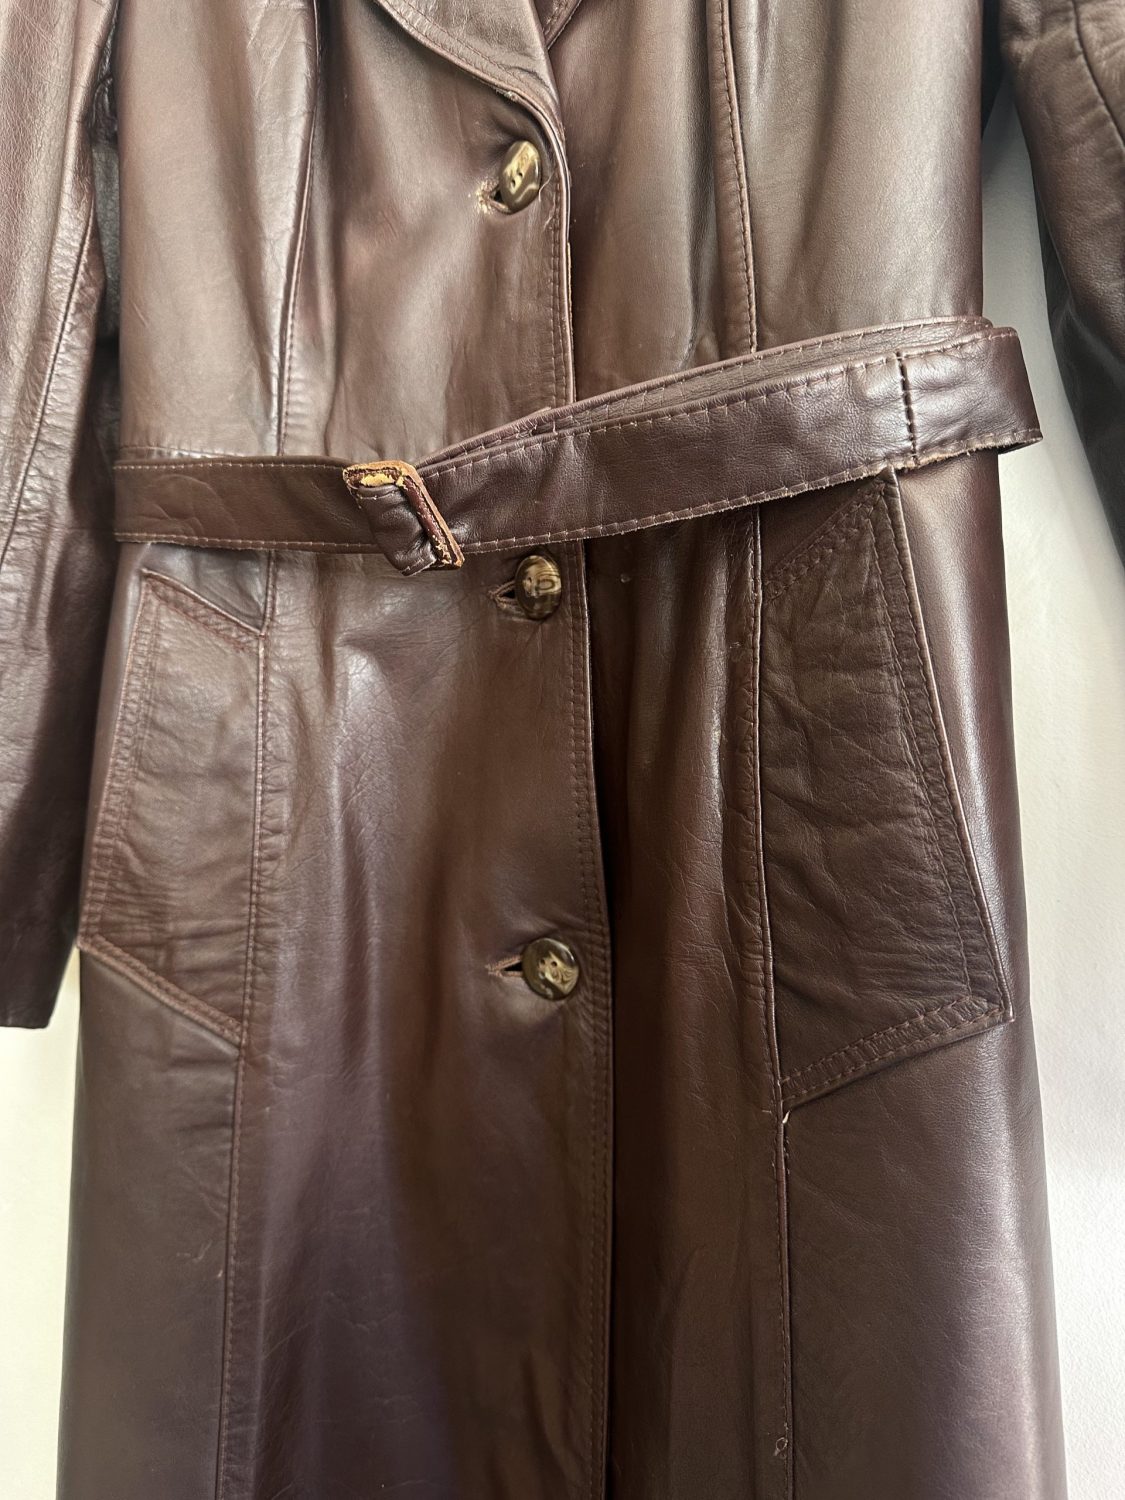 RICH BROWN VINTAGE LONG LEATHER TRENCH COAT | Chaos Bazaar Vintage